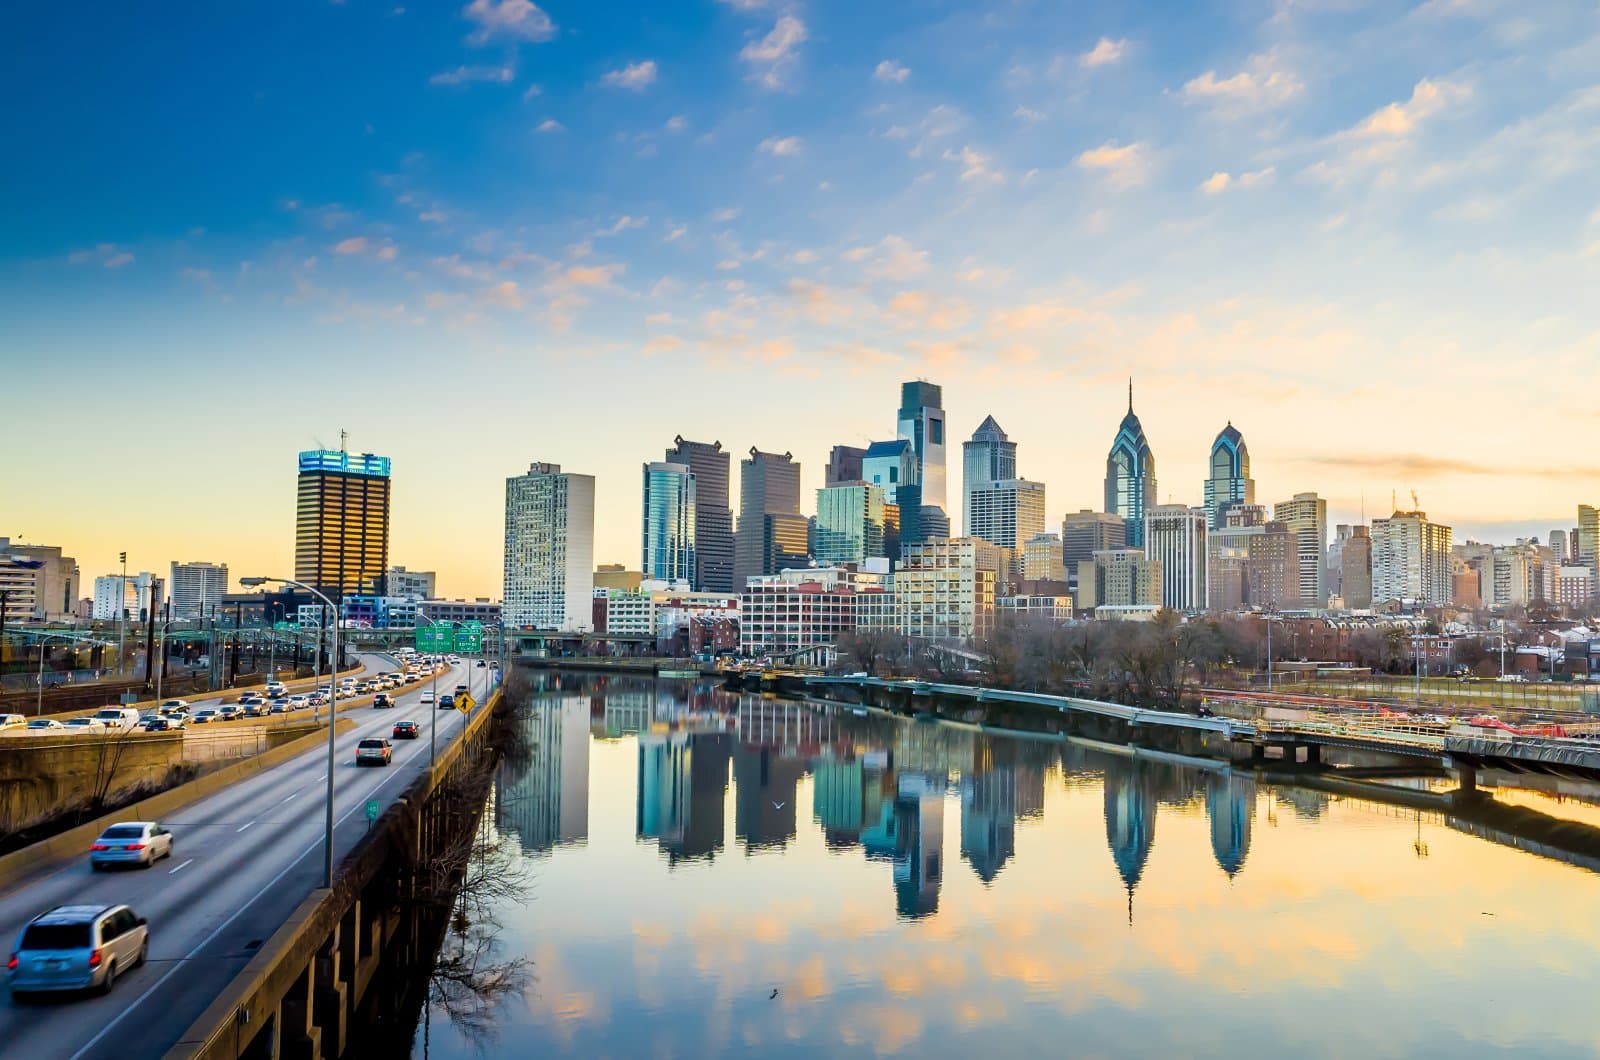 Image Credit: Shutterstock / f11photo <p><span>Philadelphia introduced the “More Color More Pride” flag, adding black and brown stripes to represent LGBTQ+ people of color. The city has addressed issues of racial discrimination within the LGBTQ+ community, striving for inclusivity and unity.</span></p>